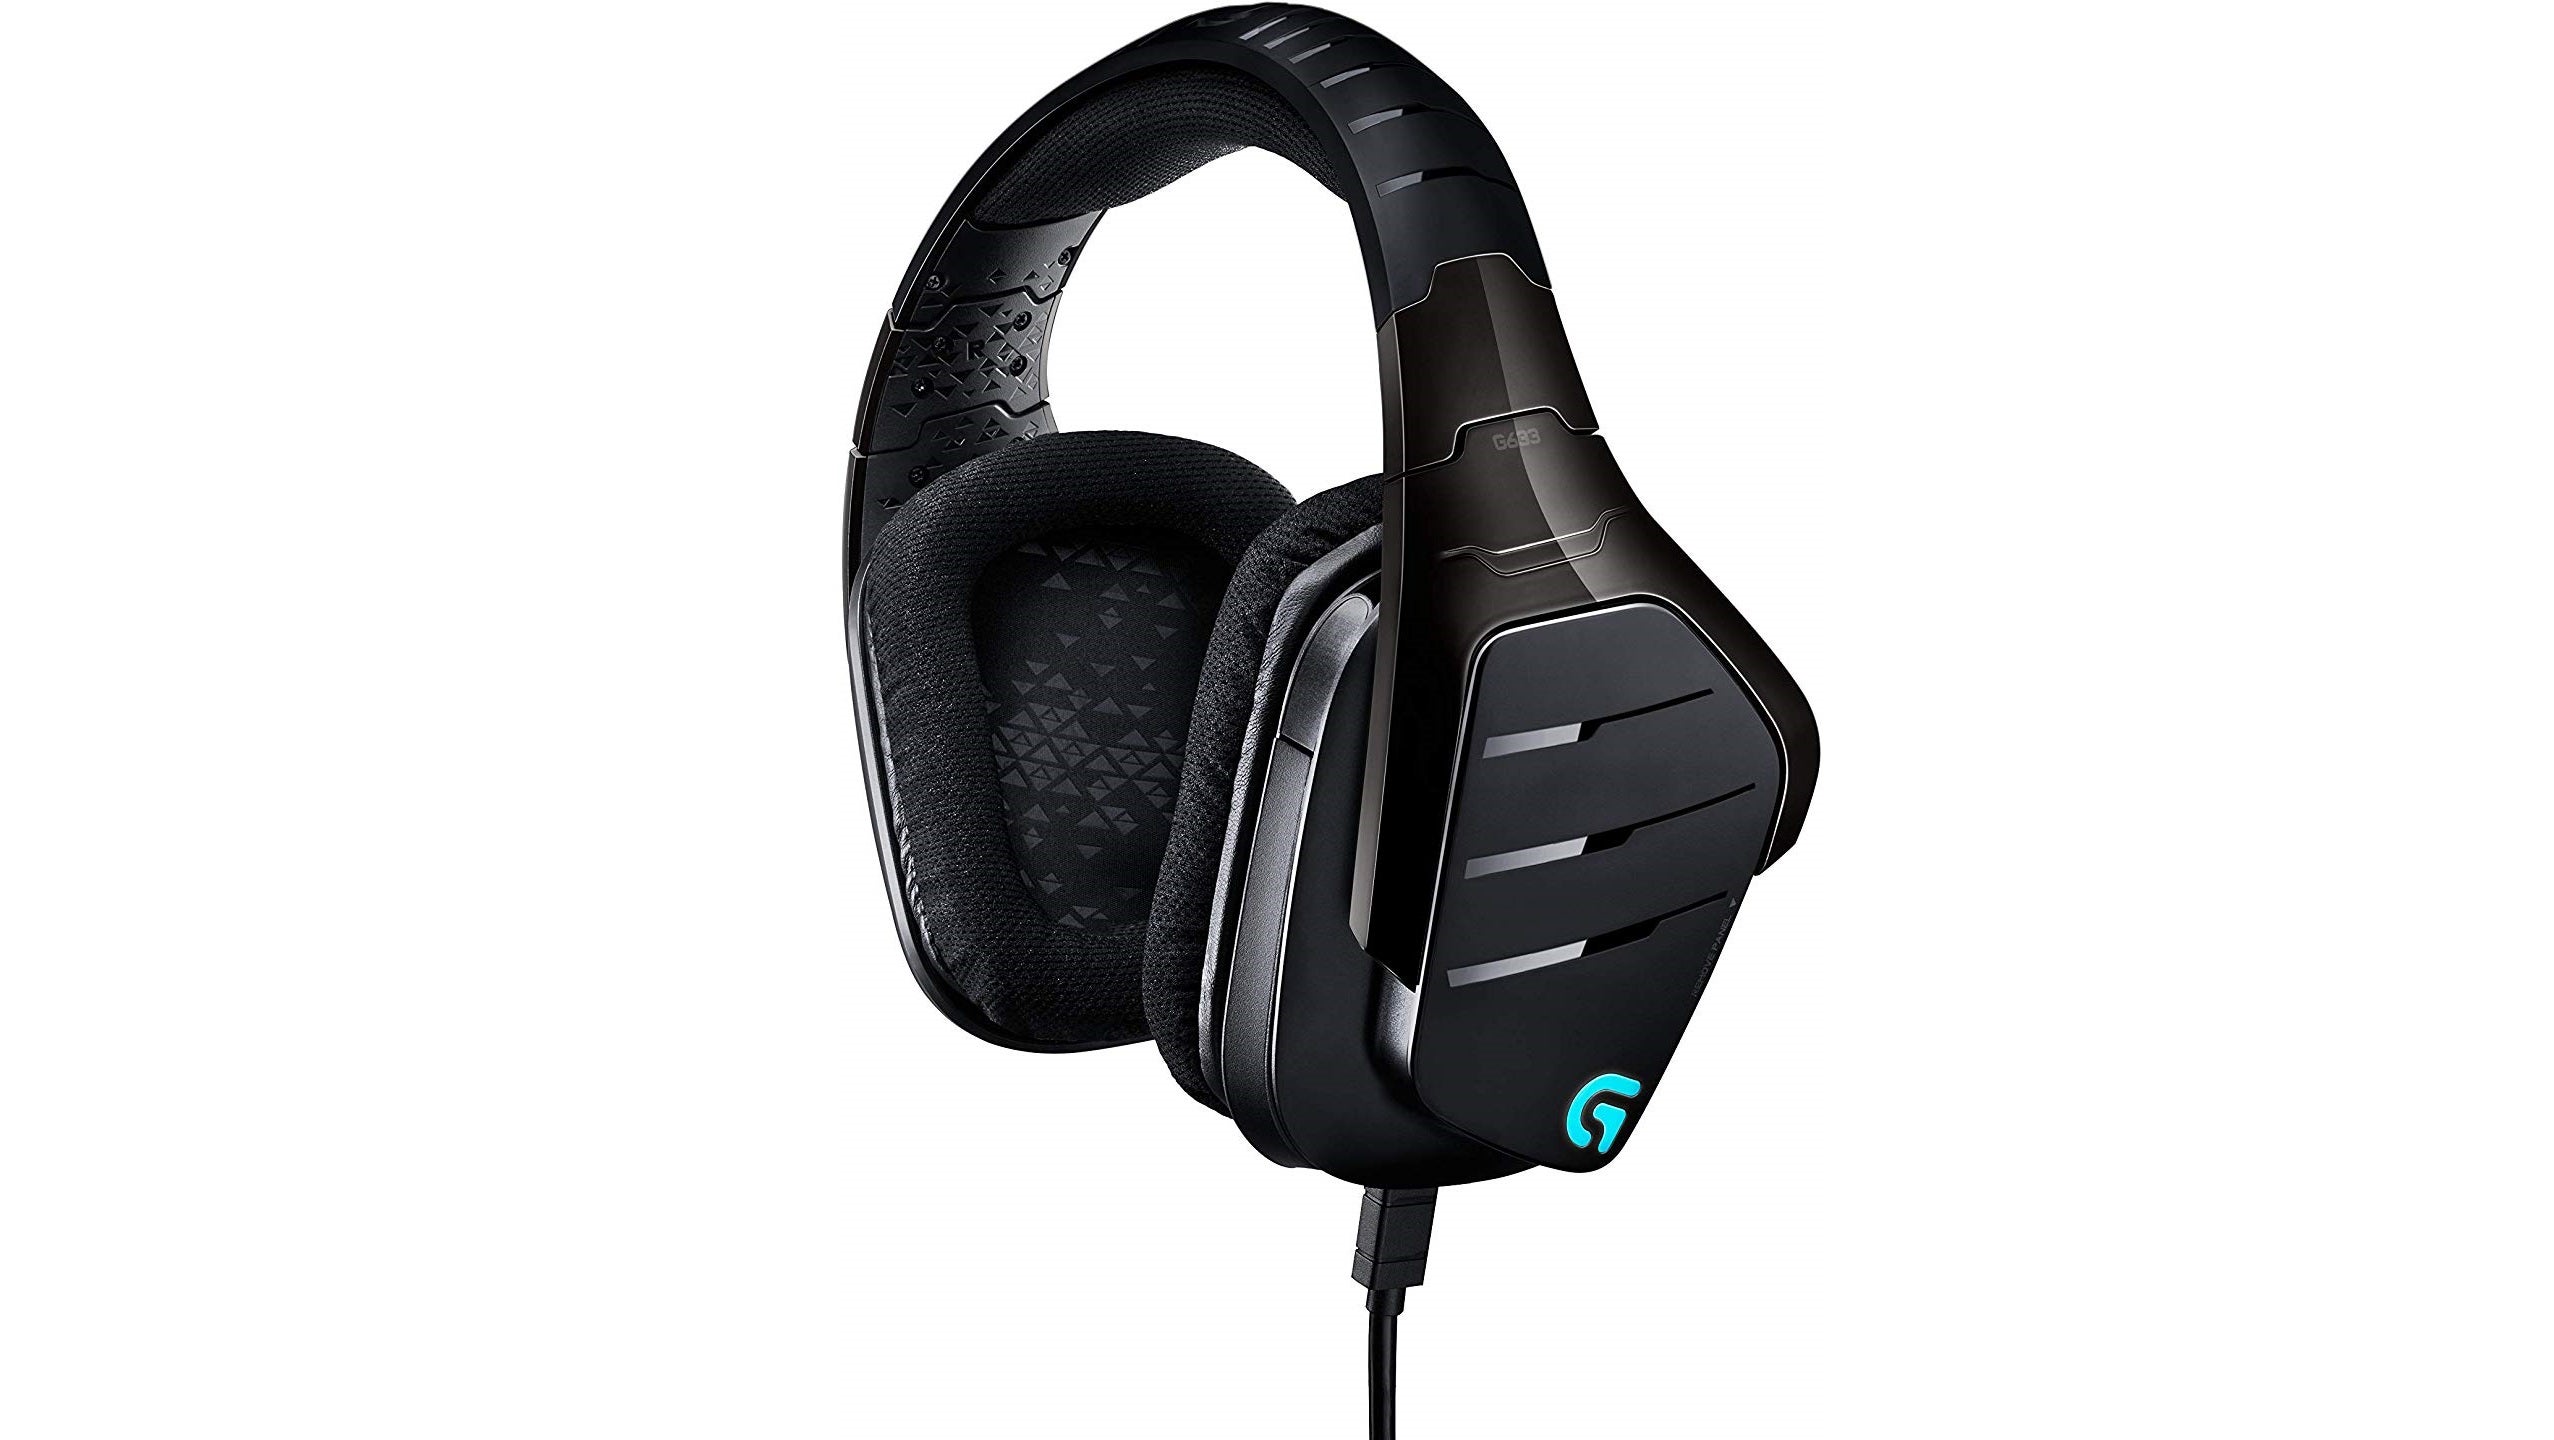 Image for There's up to 40% off these Logitech gaming peripherals and accessories